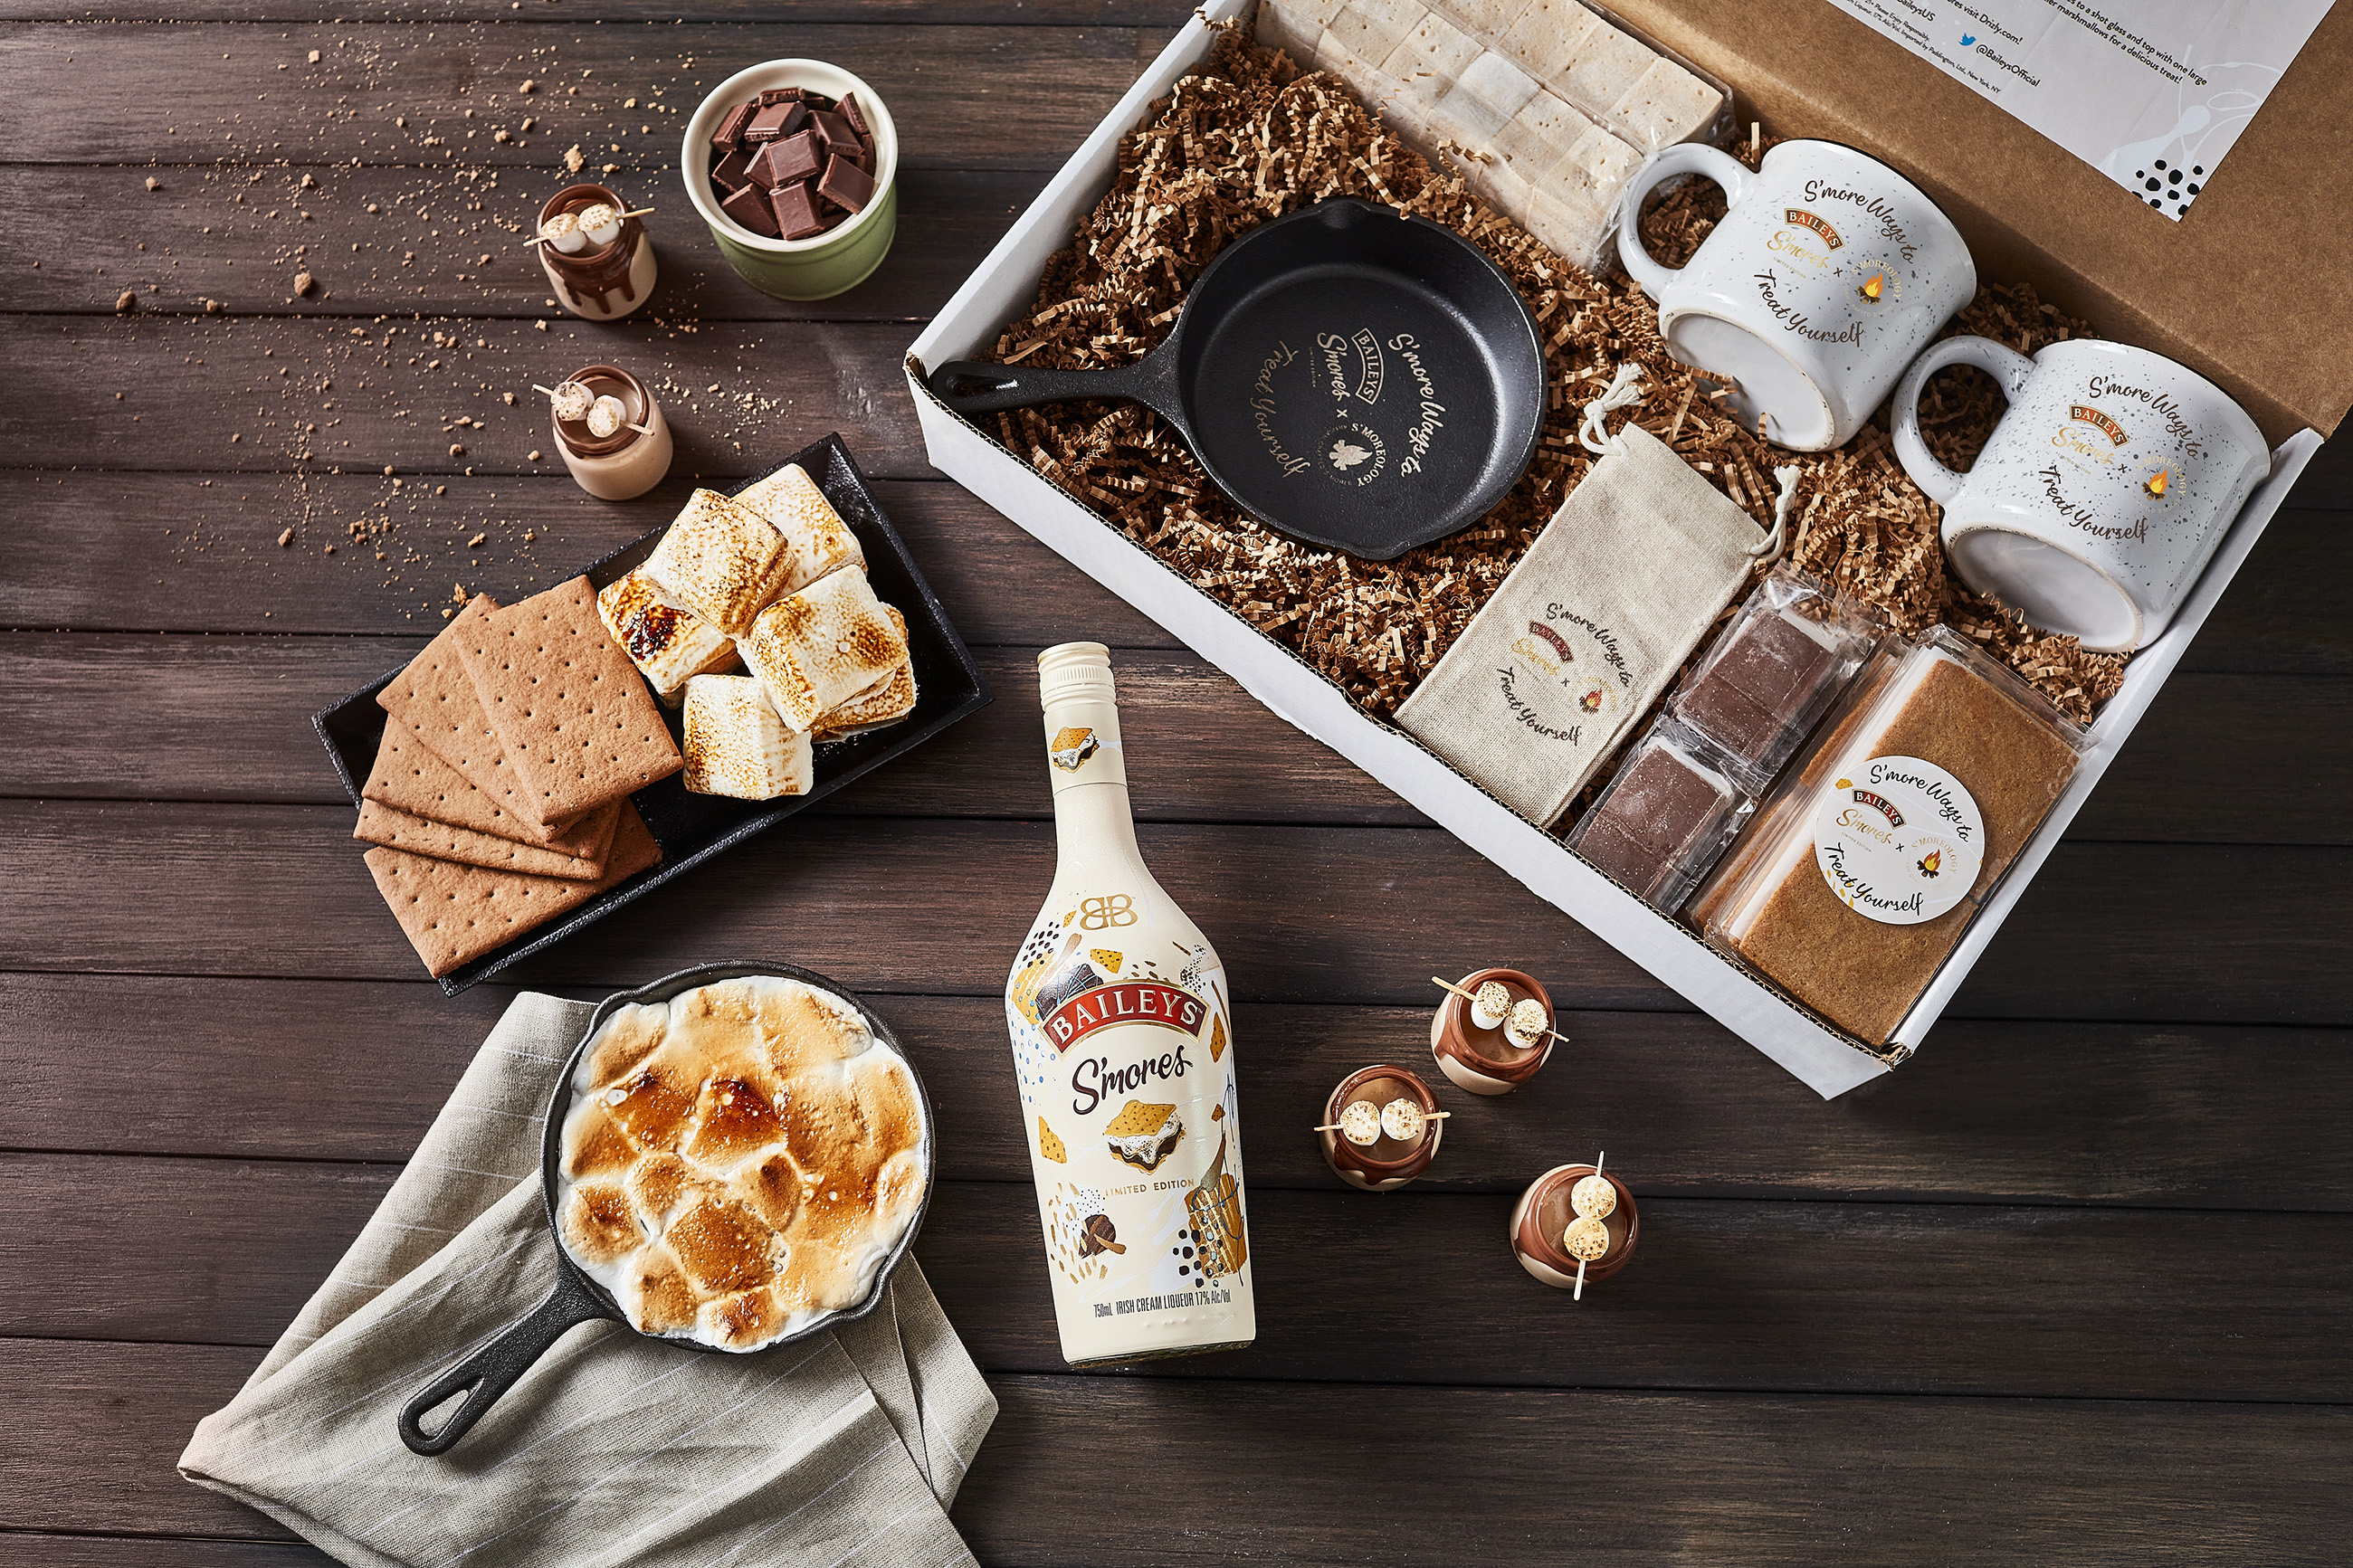 Baileys is serving up yet another way to treat yourself by partnering with Los Angeles-based artisan s’mores bakeshop, S’moreology, to curate a one-of-a-kind Baileys S’mores Skillet Kit perfect for fall gatherings!